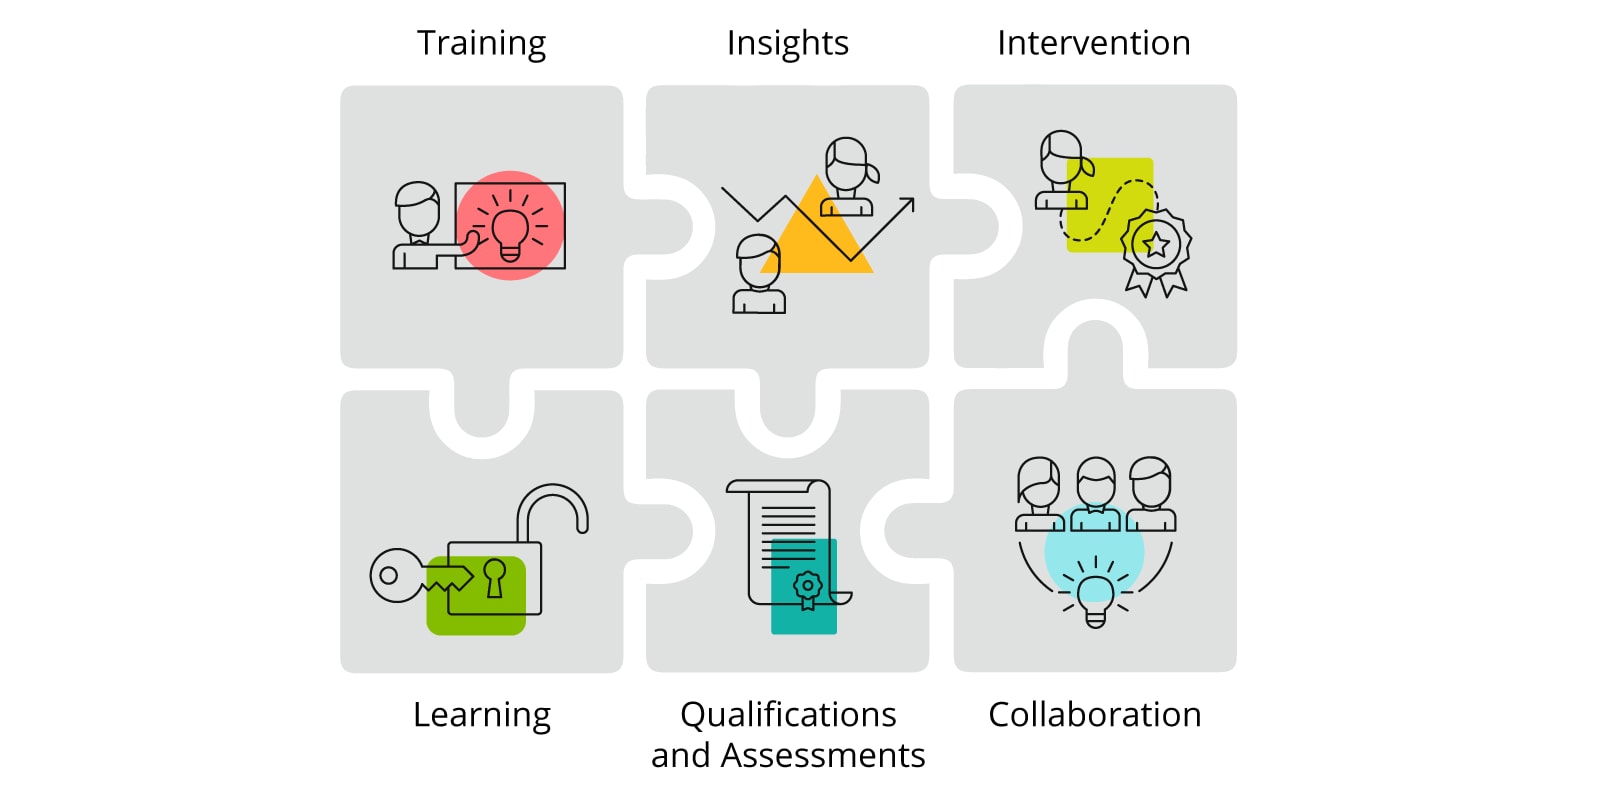 Training, Insights, Intervention, Learning, Qualifications and Assessments, Collaboration